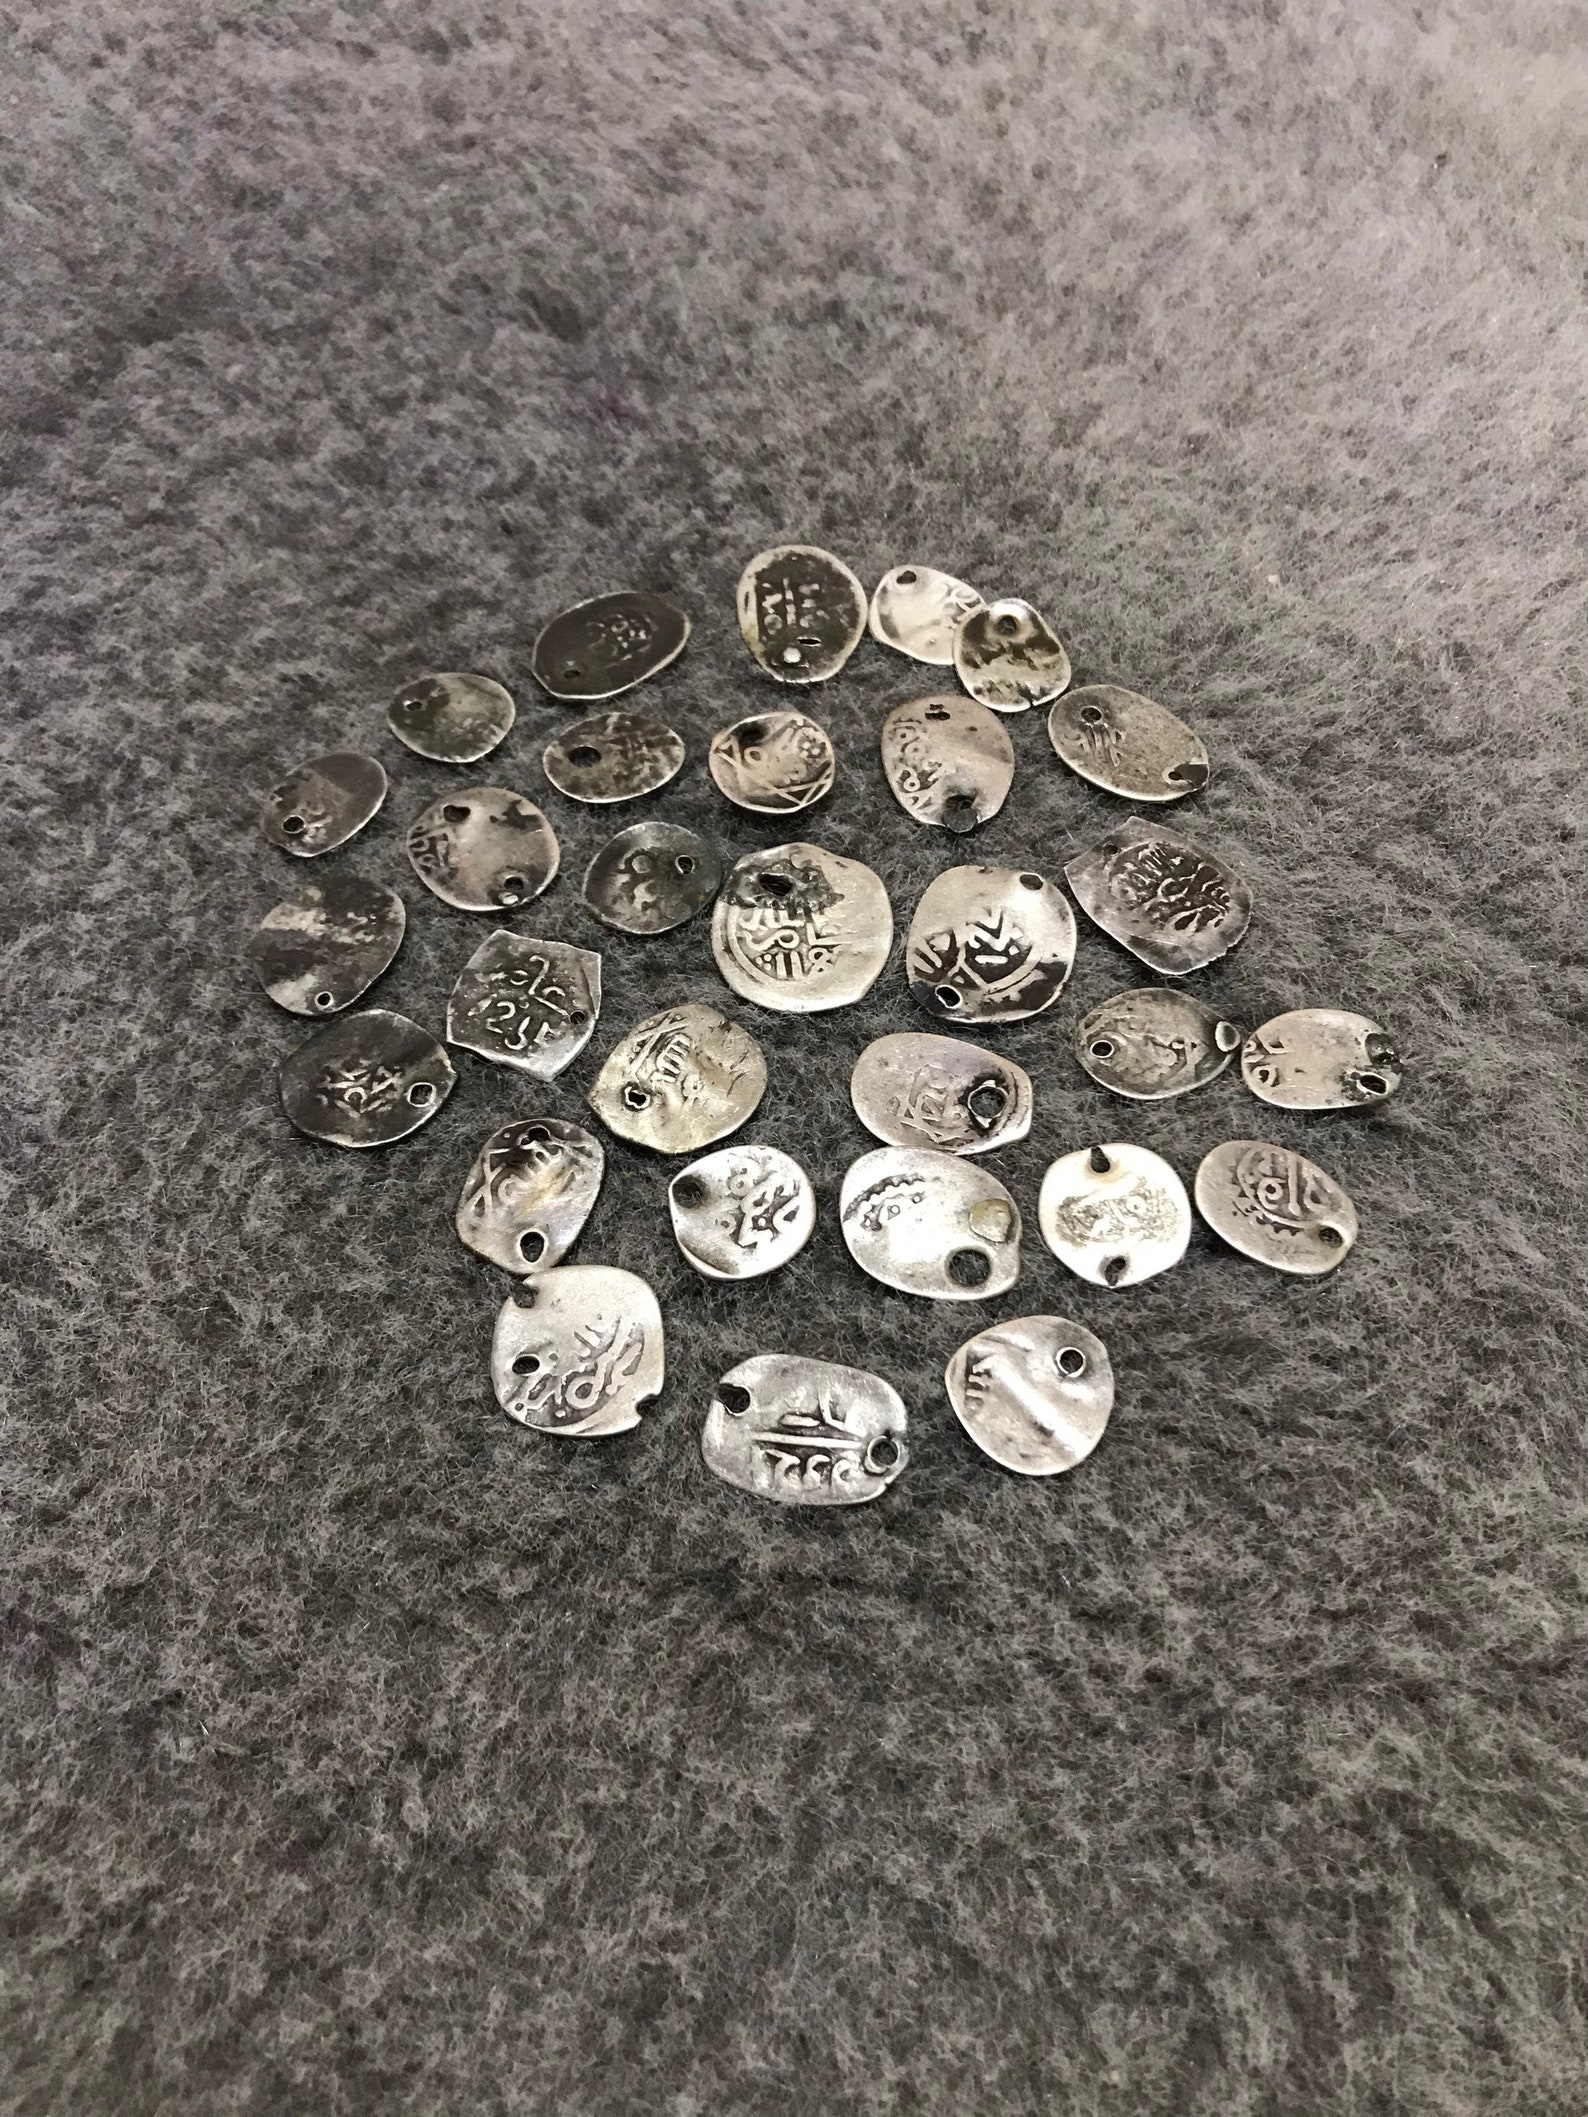 Set of 30 Old Berber Silver Coins From Morocco,very Old Moroccan Silver ...